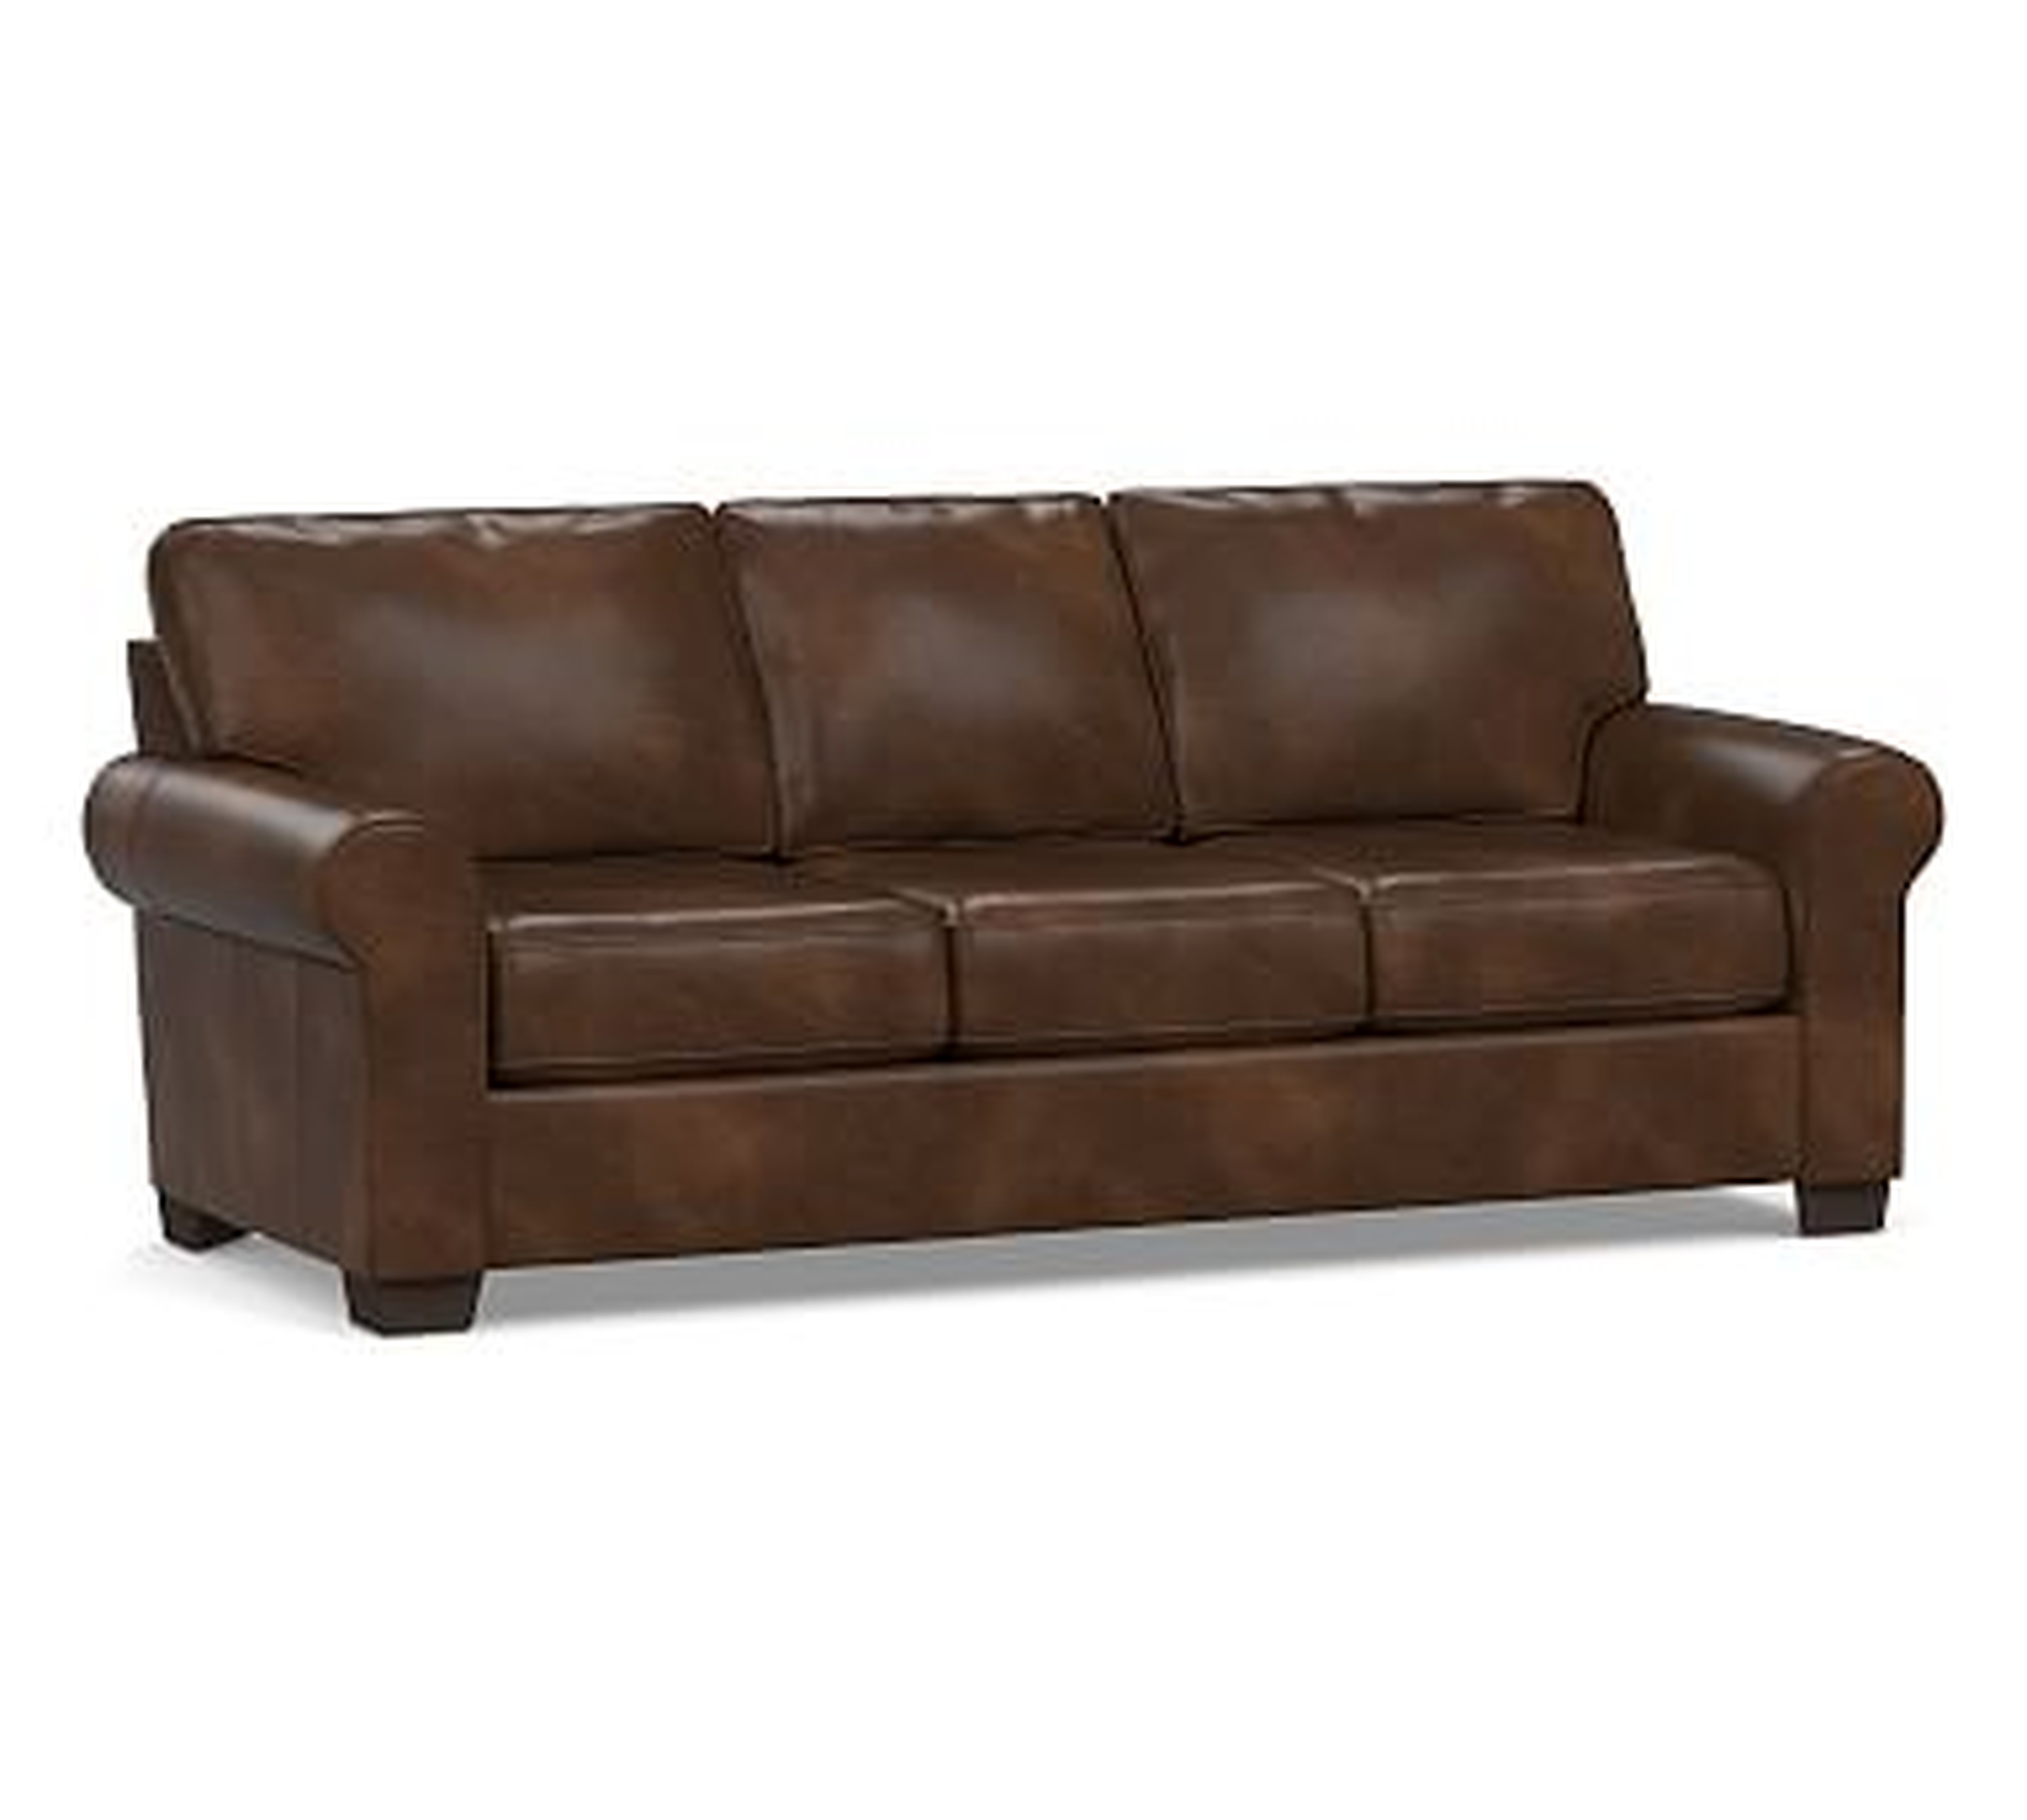 Buchanan Roll Arm Leather Sofa 87", Polyester Wrapped Cushions, Vintage Cocoa - Pottery Barn